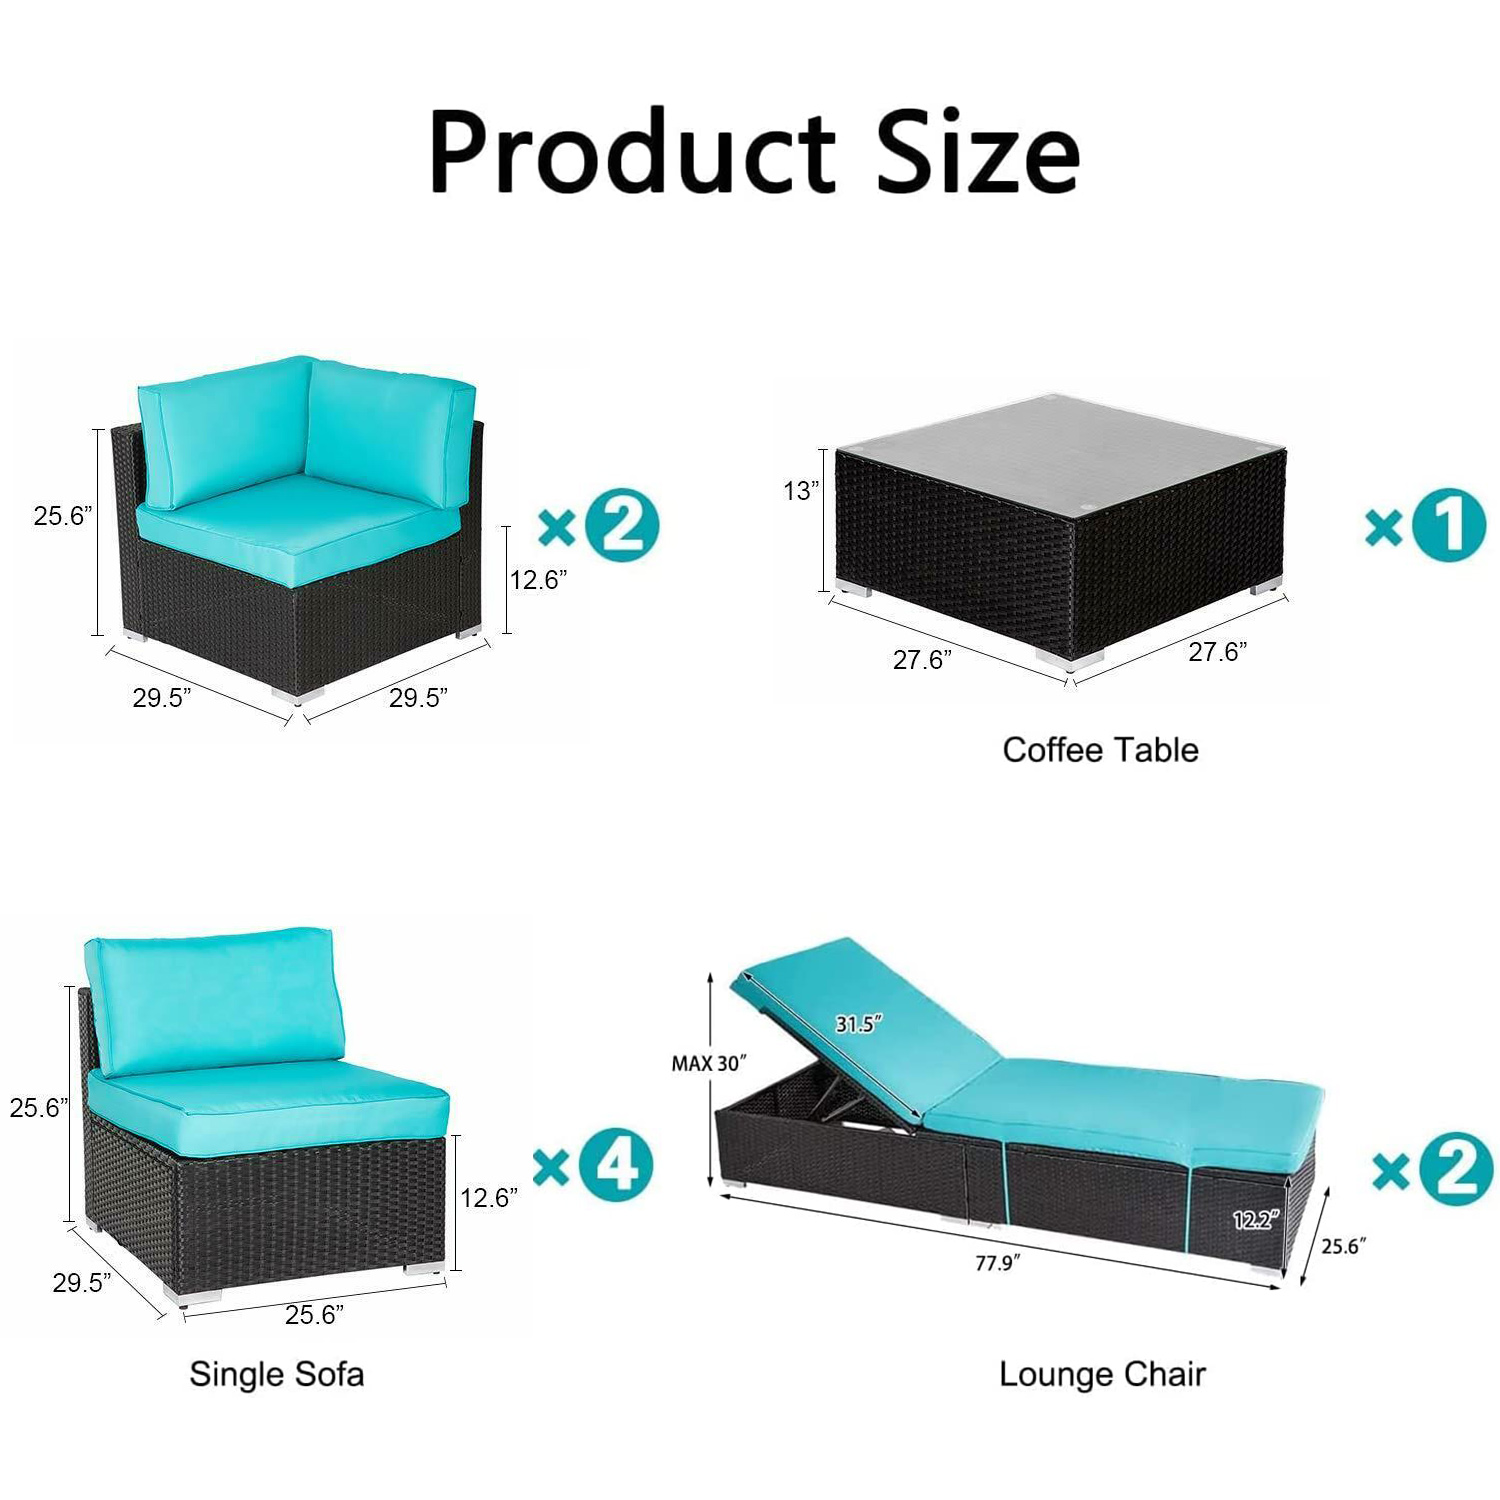 Kinbor 9pcs Outdoor Patio Furniture Sectional Pe Rattan Wicker Rattan Sofa Set with Chaise Lounge Chair, Turquoise - image 5 of 9